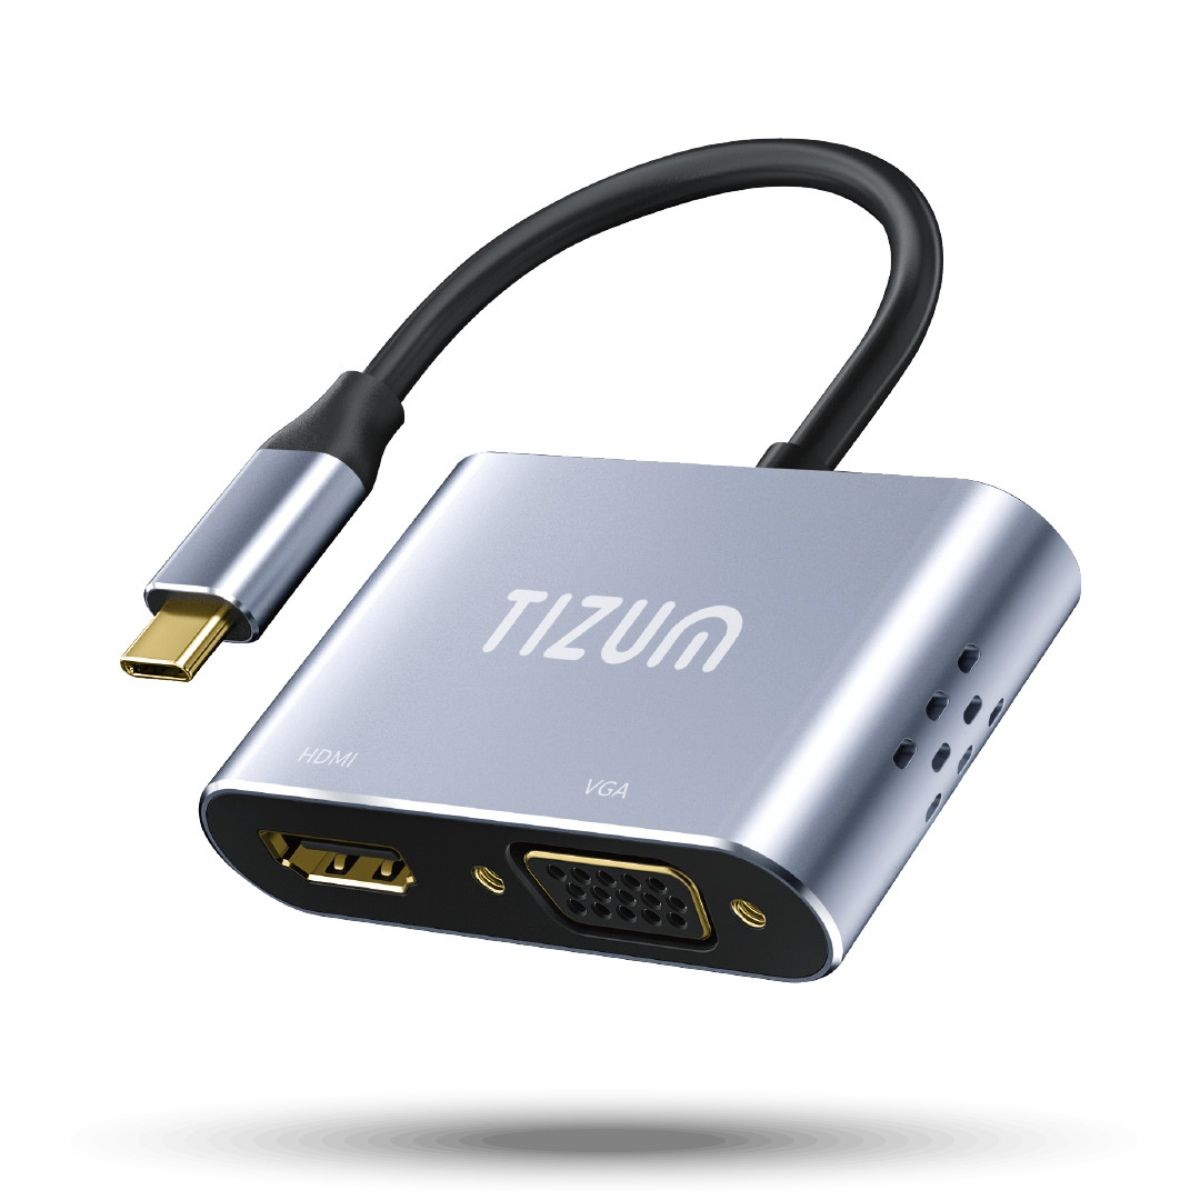 Tizum Usb Extension Hub 2-In-1 Portable Multiport Adapter-Connector Type C Usb Hub To 4K Hdmi